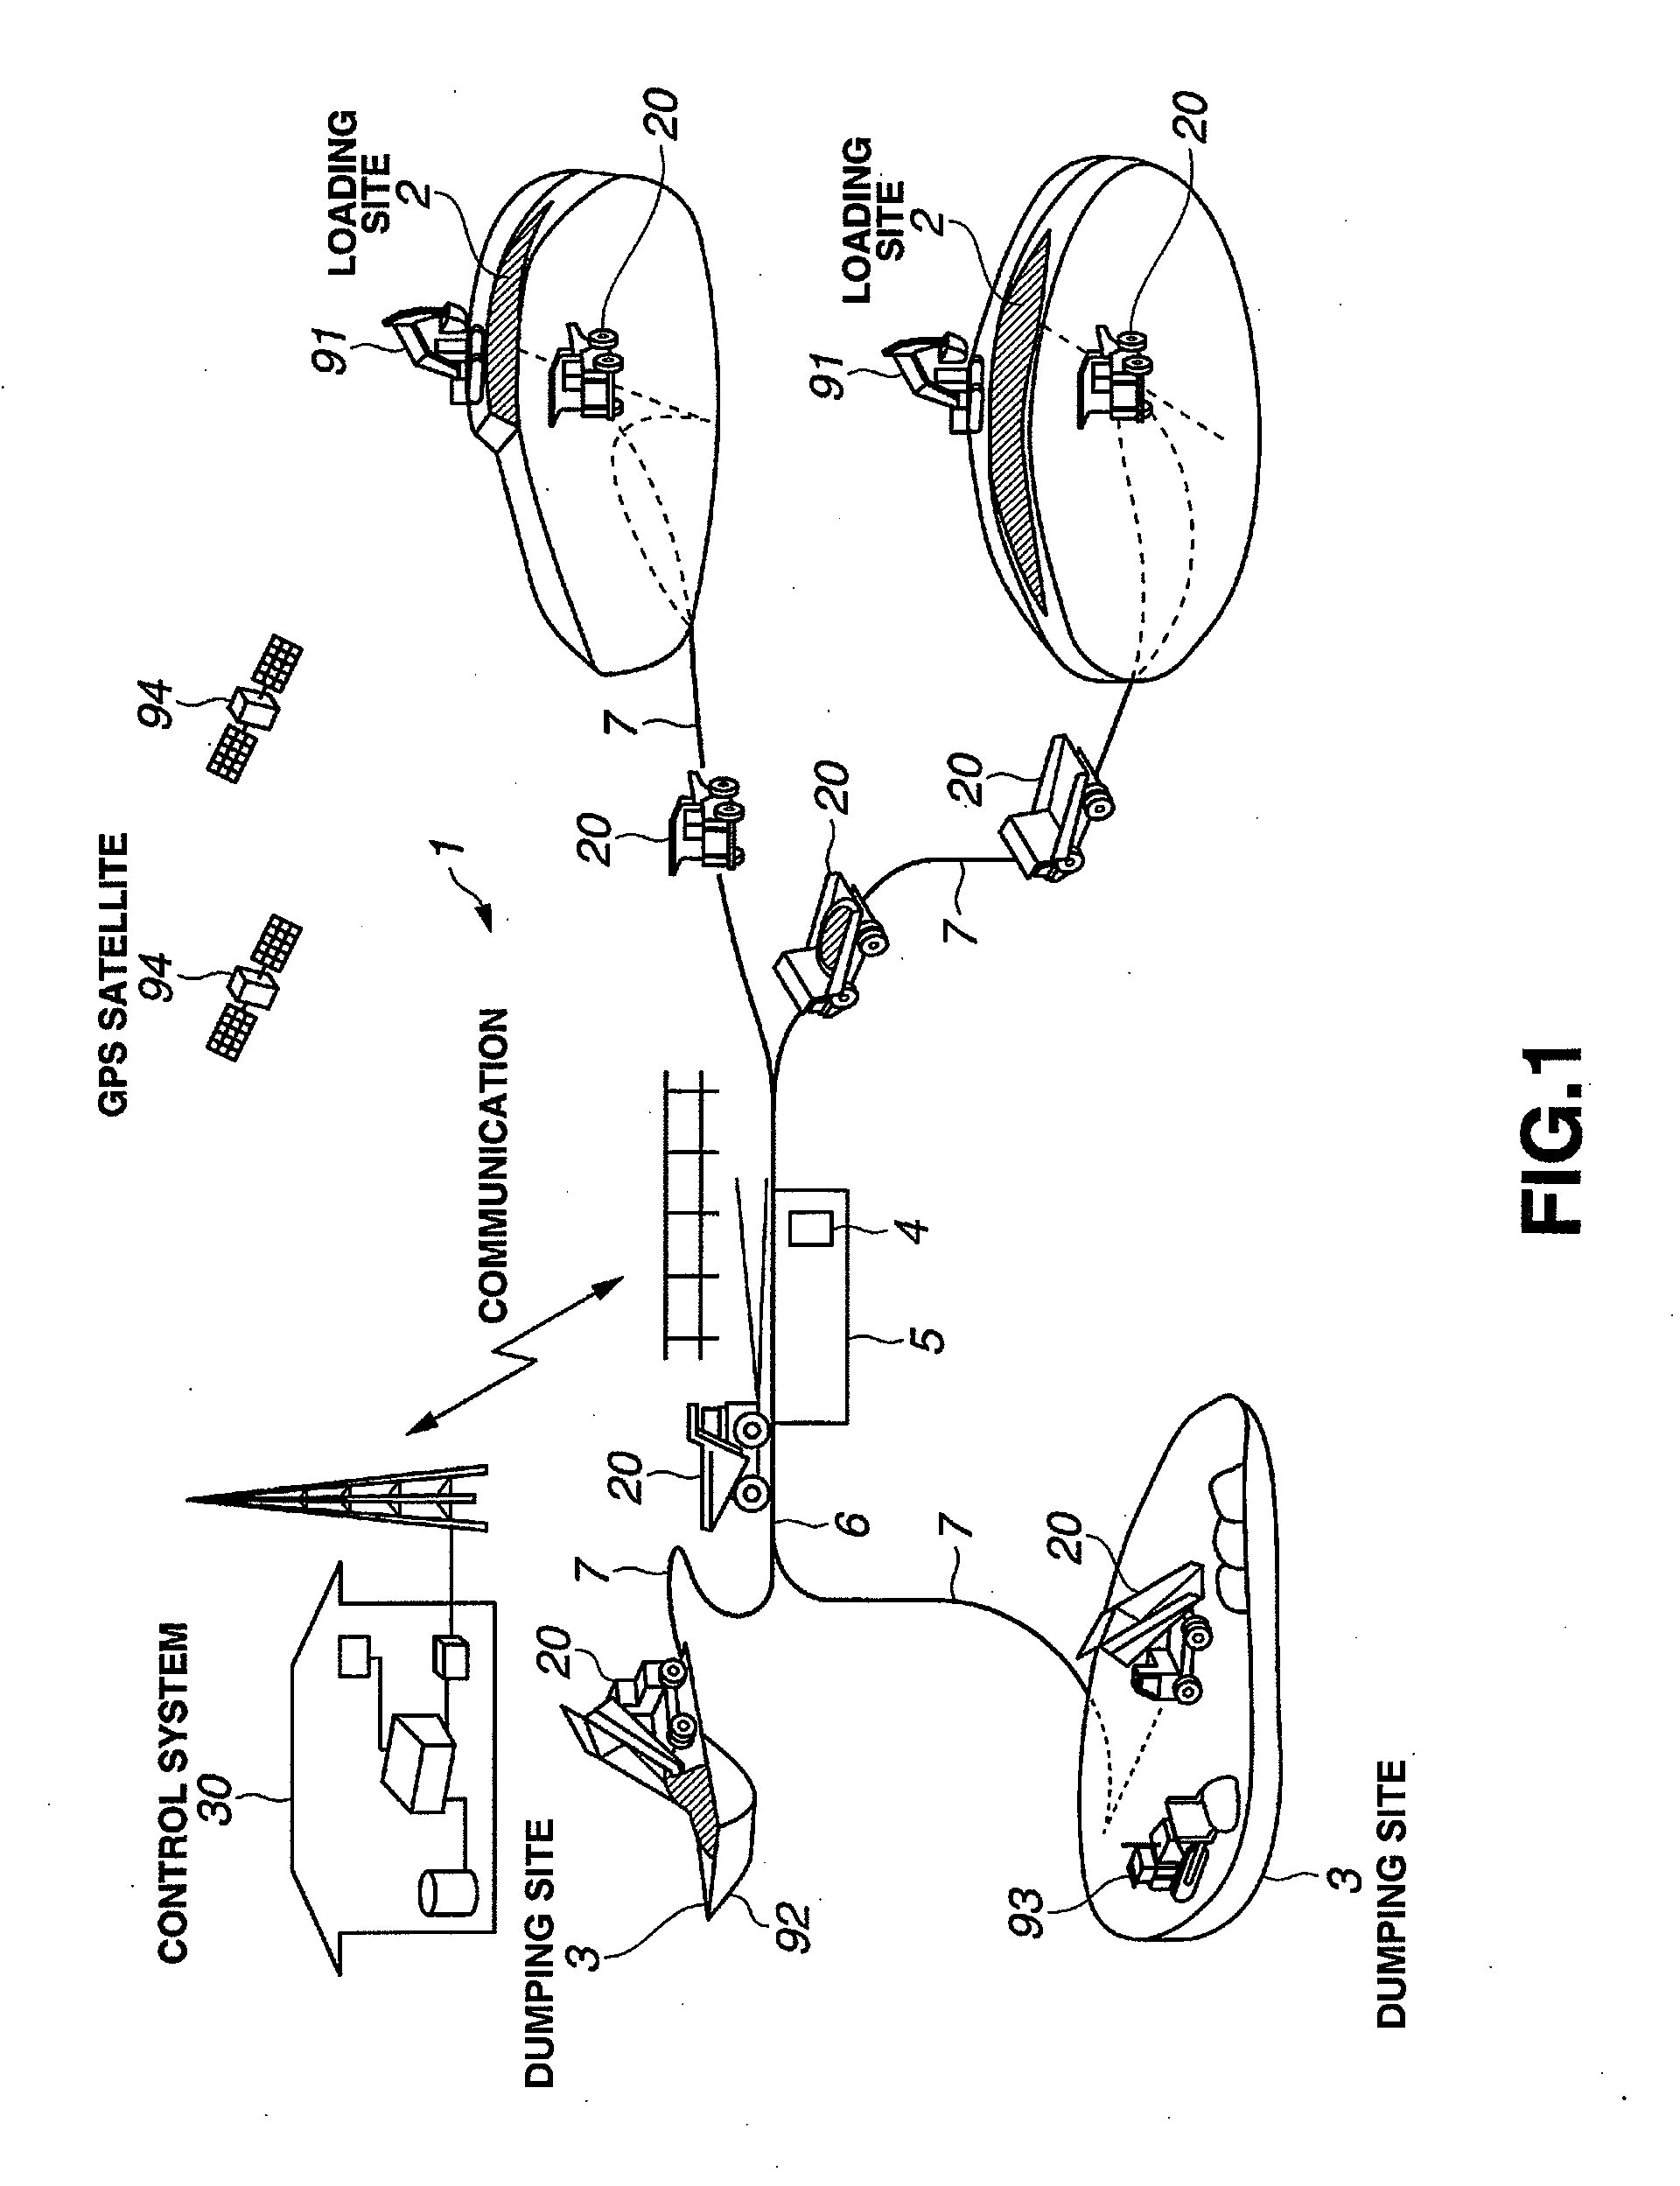 Travel route generating method for unmanned vehicle